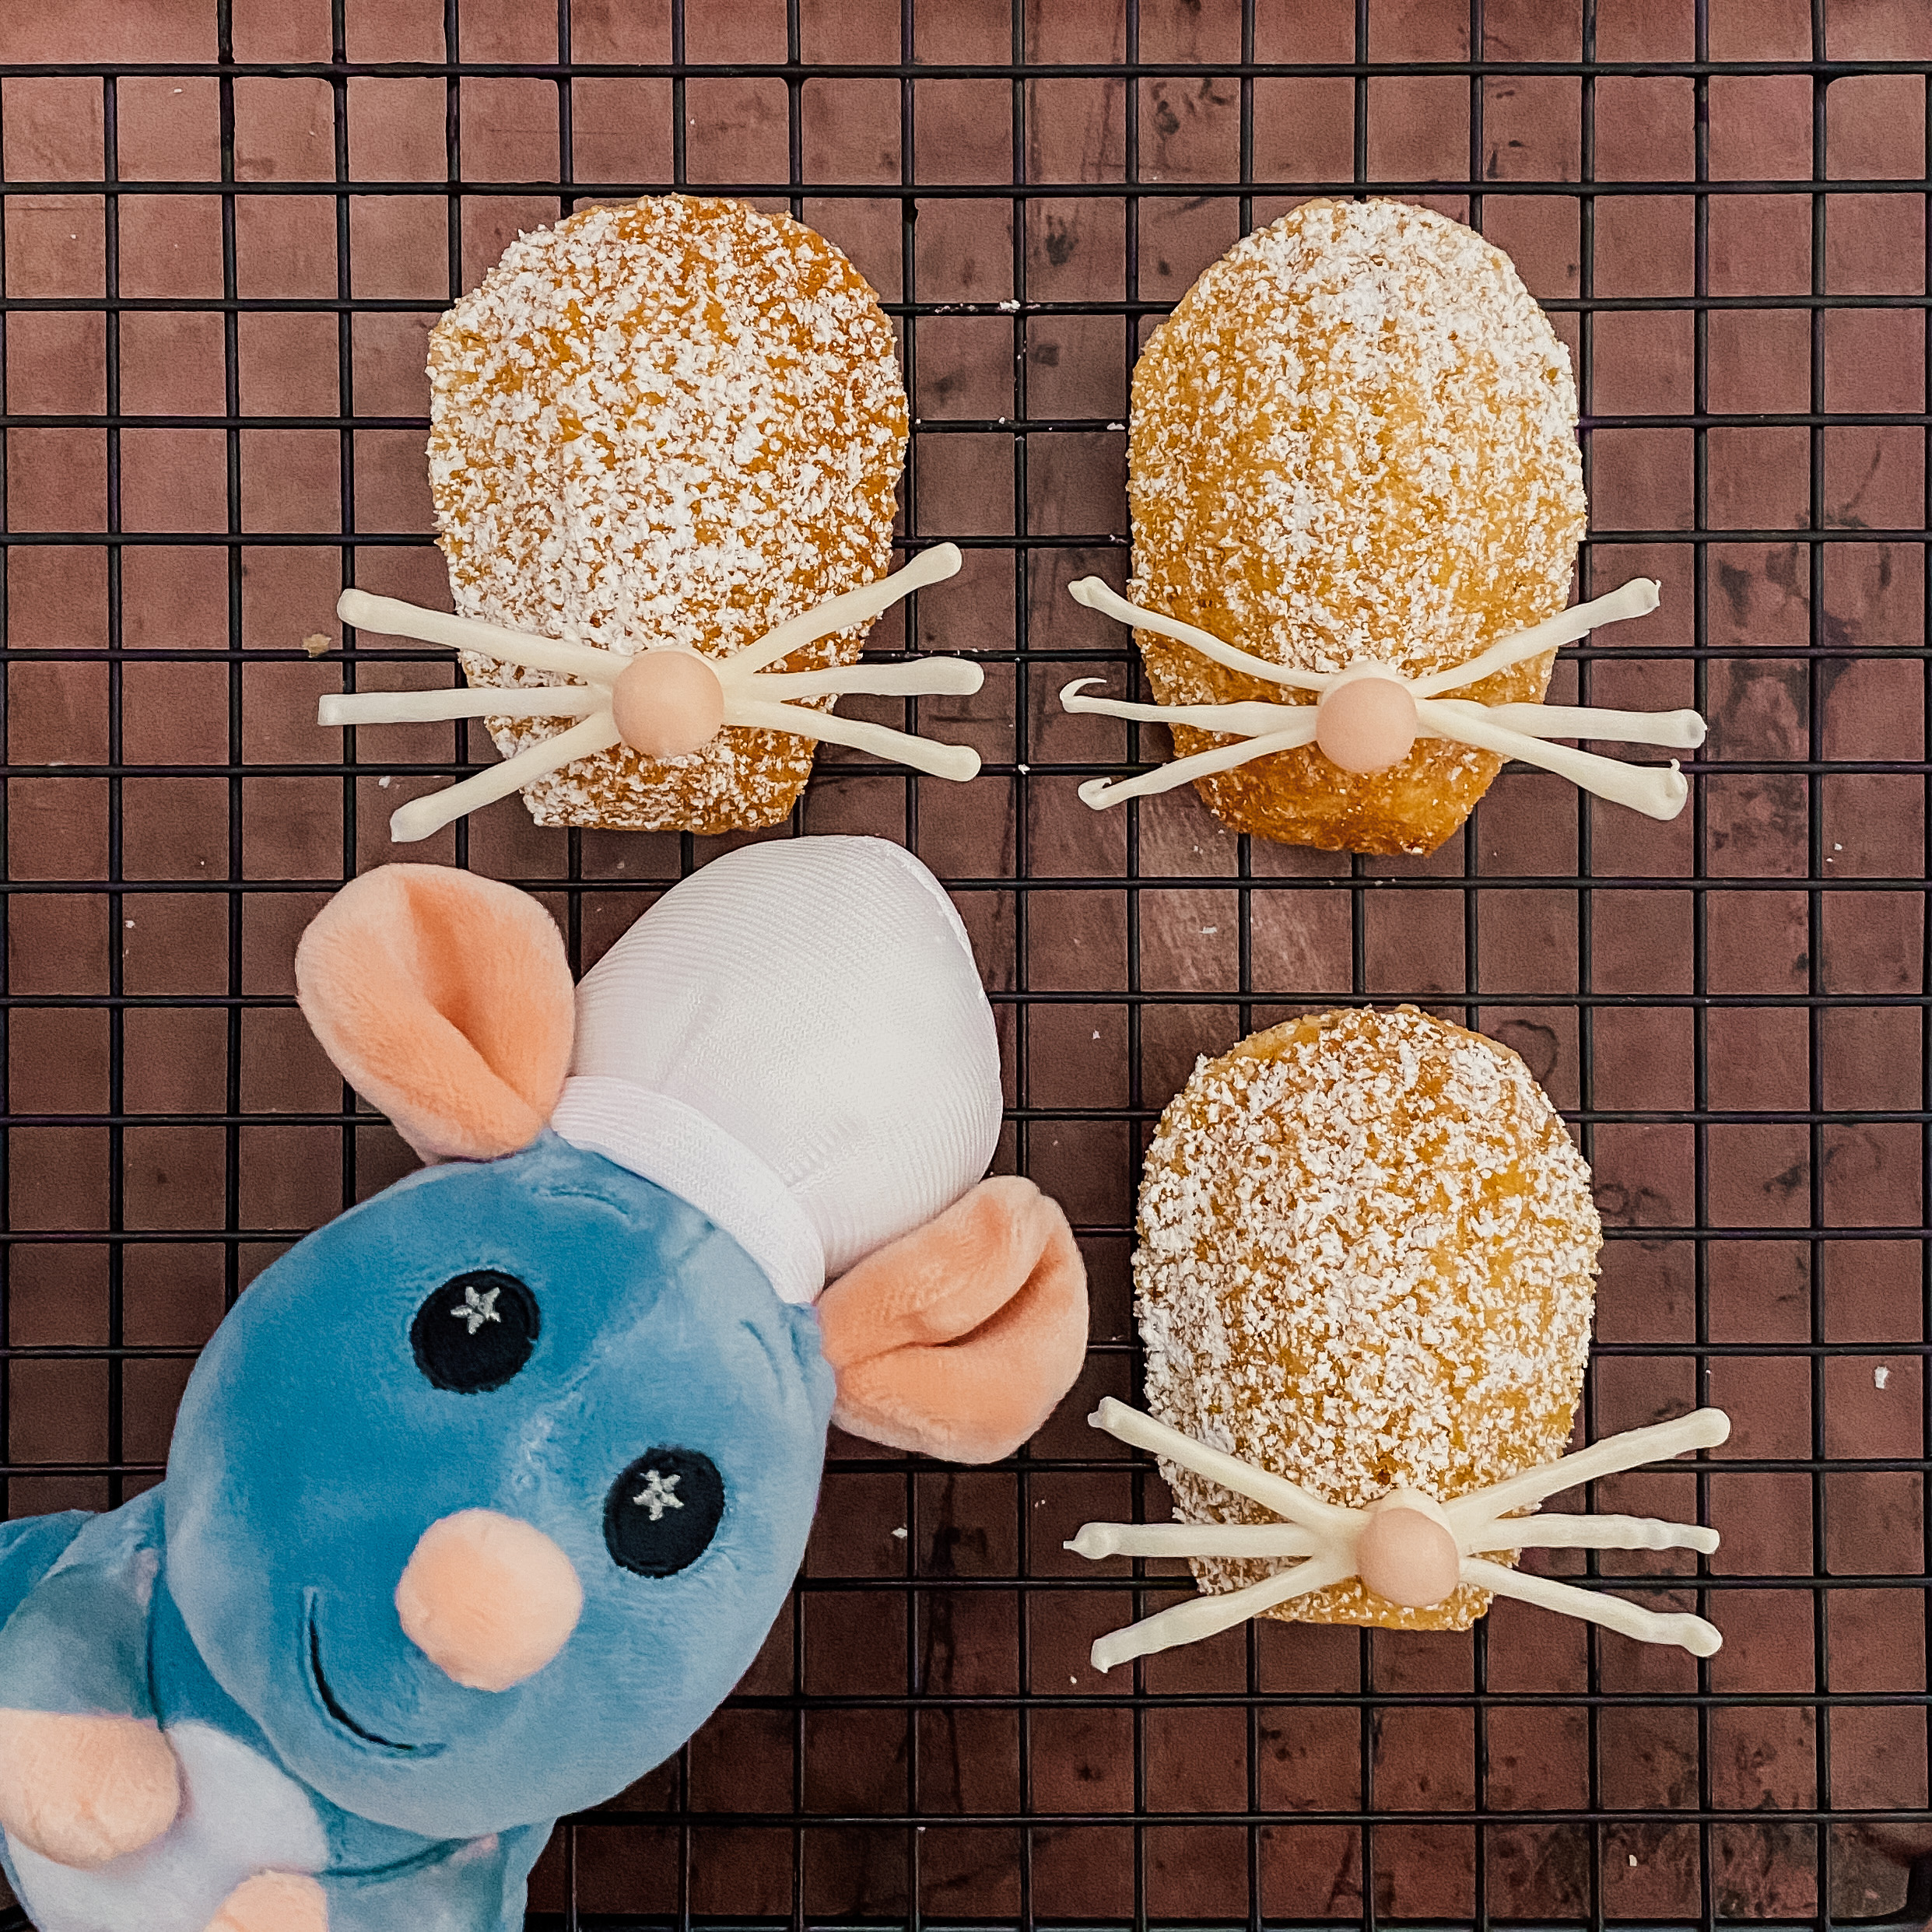 Ratatouille Madeleines (4 lemon madeleines with powdered sugar, white chocolate whiskers and a pink fondant nose) with a Remy plushie